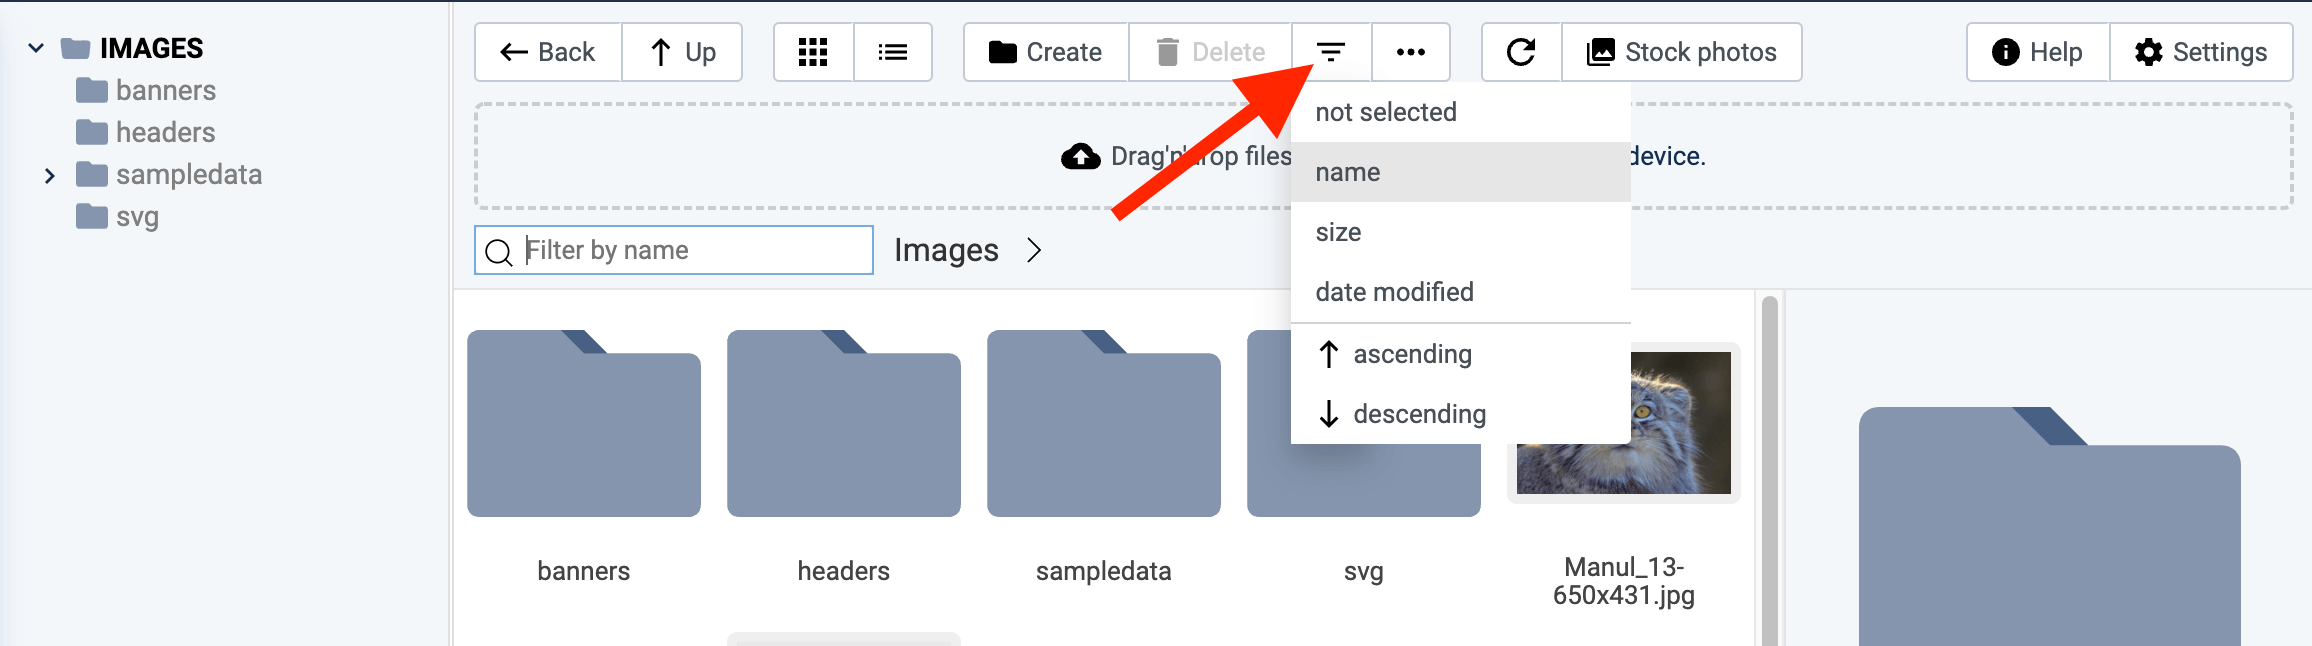 Added sorting files by size, date modified, name